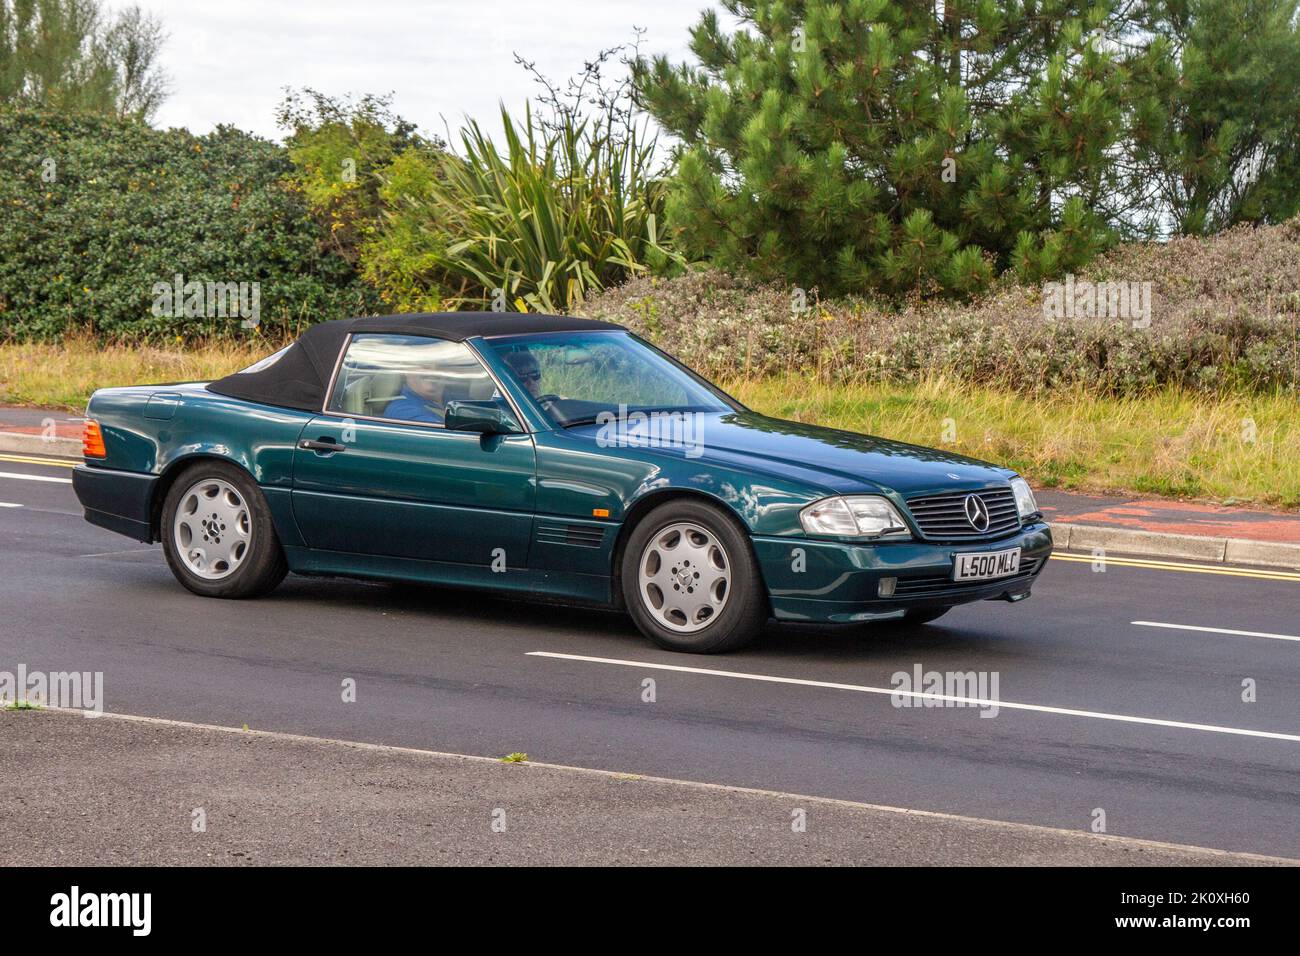 1994 90s nineties Green MERCEDES BENZ 4973 cc 4-speed automatic; at the Southport Classic car and Speed event on the seafront promenade. UK Stock Photo